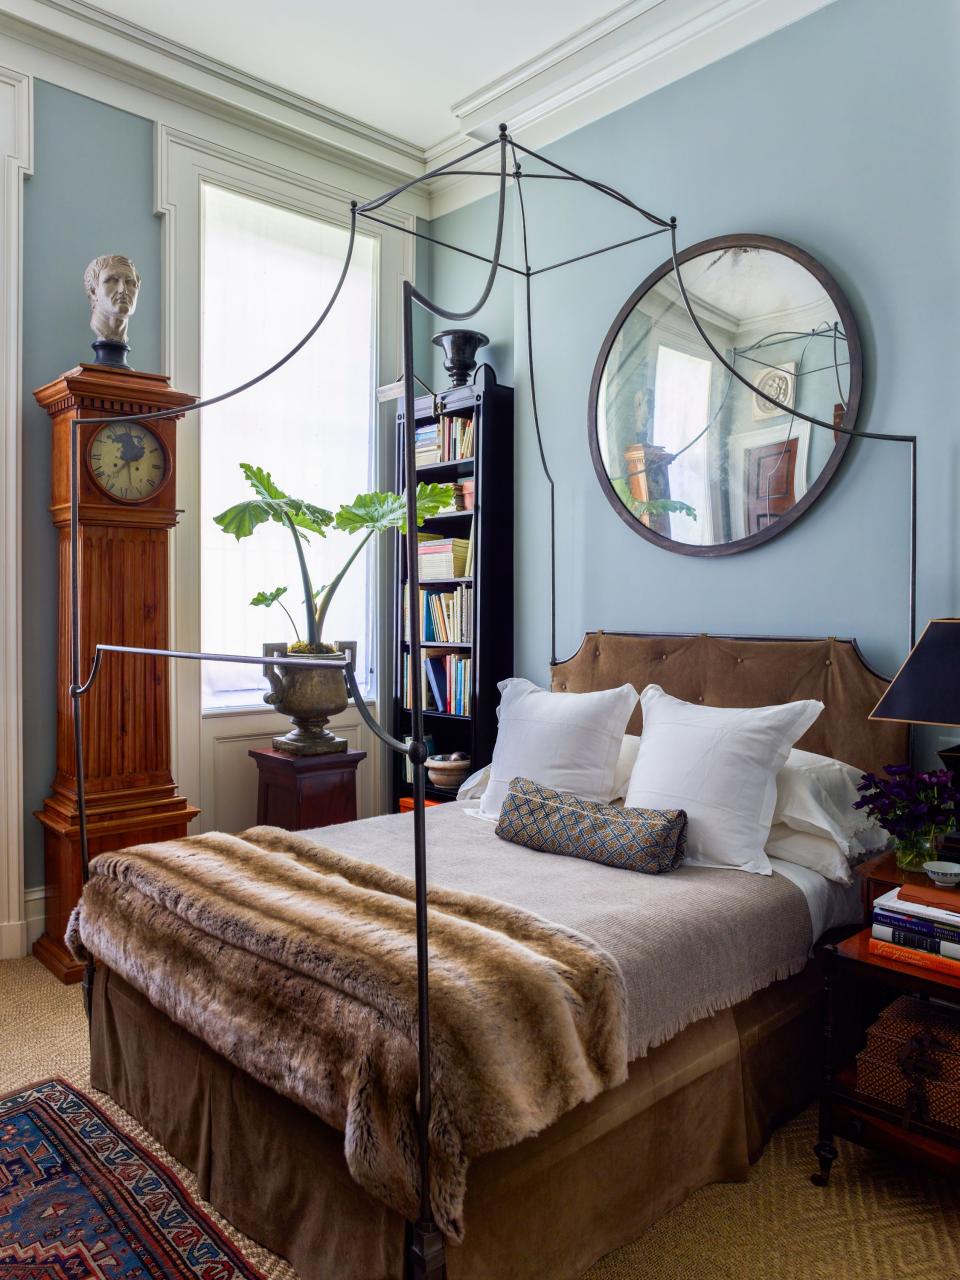 Schafer designed the custom canopy bed in the main suite in the style of a 19th-century campaign bed and had the headboard and bed skirt covered in suede by Dualoy; the faux fur throw is from KRB, and the wool throw is from Aero. He also custom designed the ebonized bookcase in the corner. The antique mirror was purchased at Nadin & Macintosh, the Swedish case clock is from Evergreen Antiques, and the cast-iron urn was bought on a trip to London and placed atop a Regency mahogany pedestal from Cove Landing.